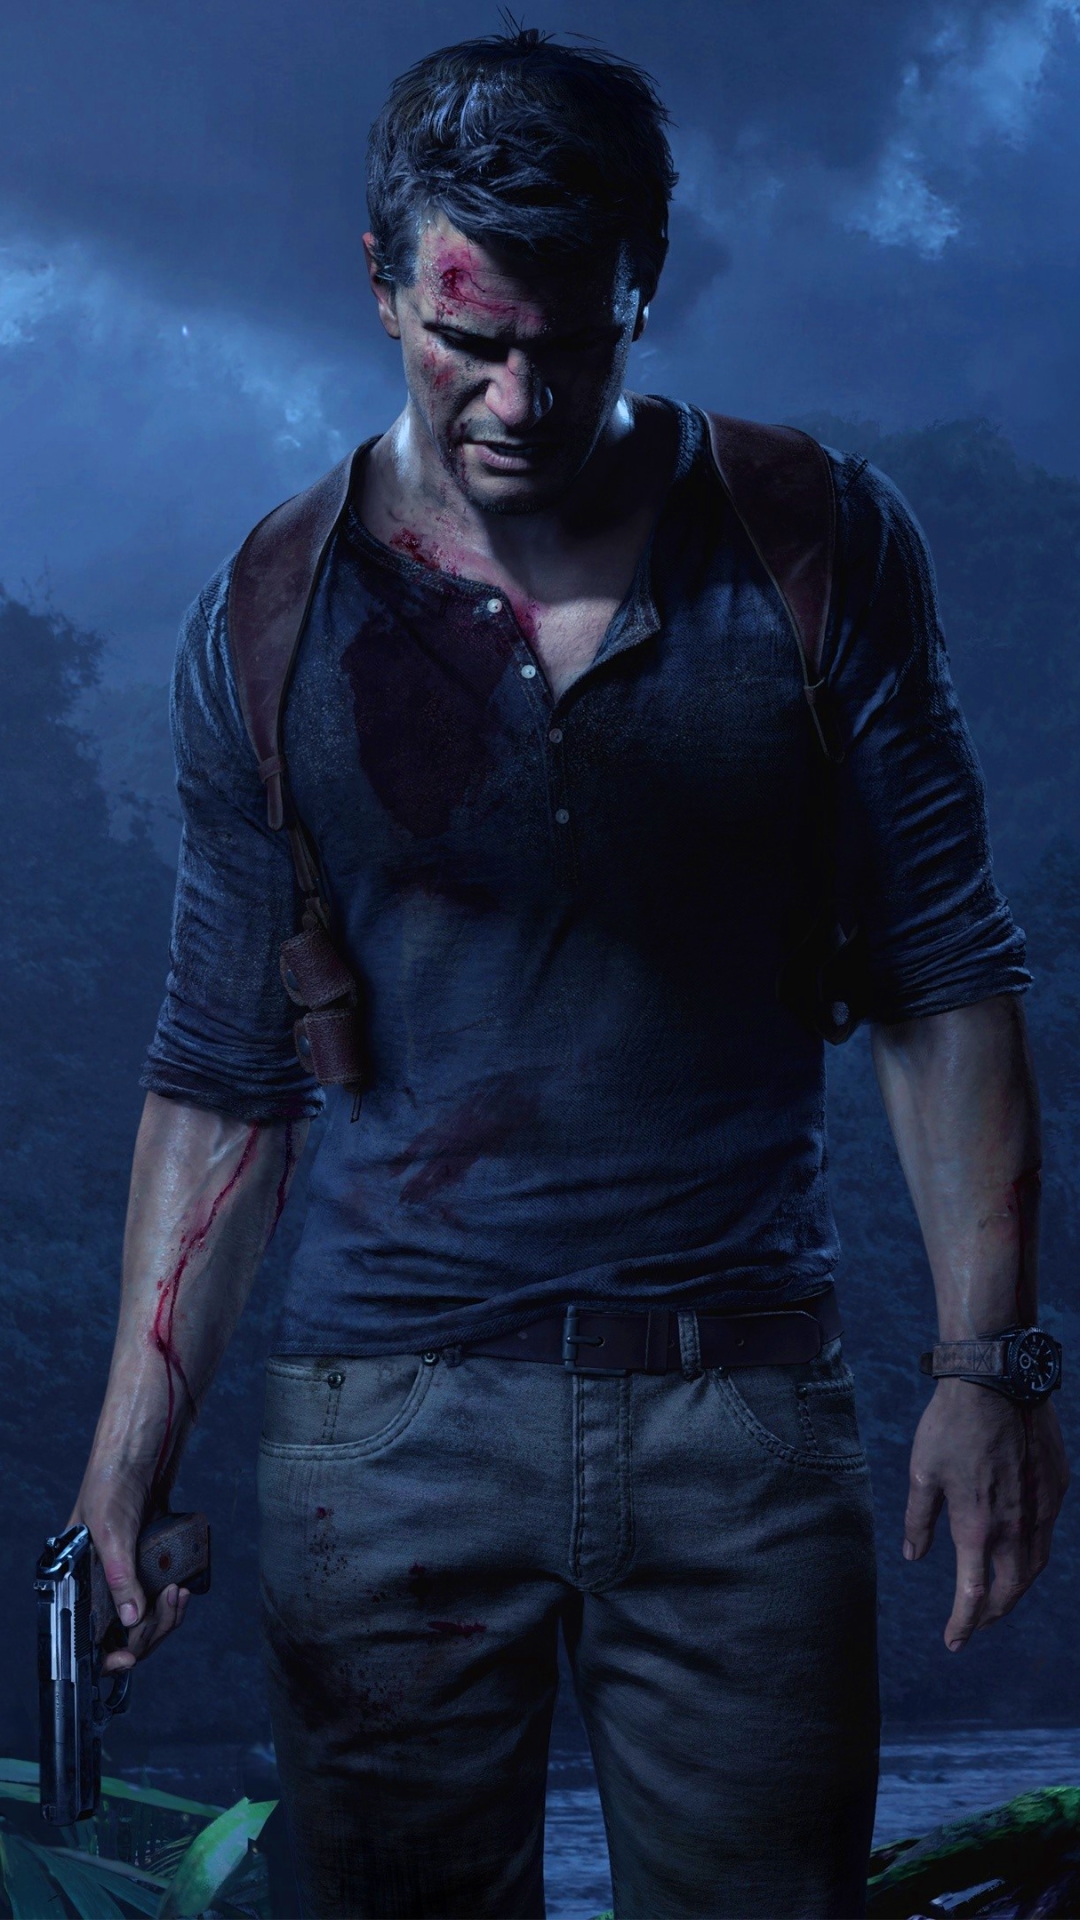 android uncharted, uncharted 4: a thief's end, gun, video game, nathan drake